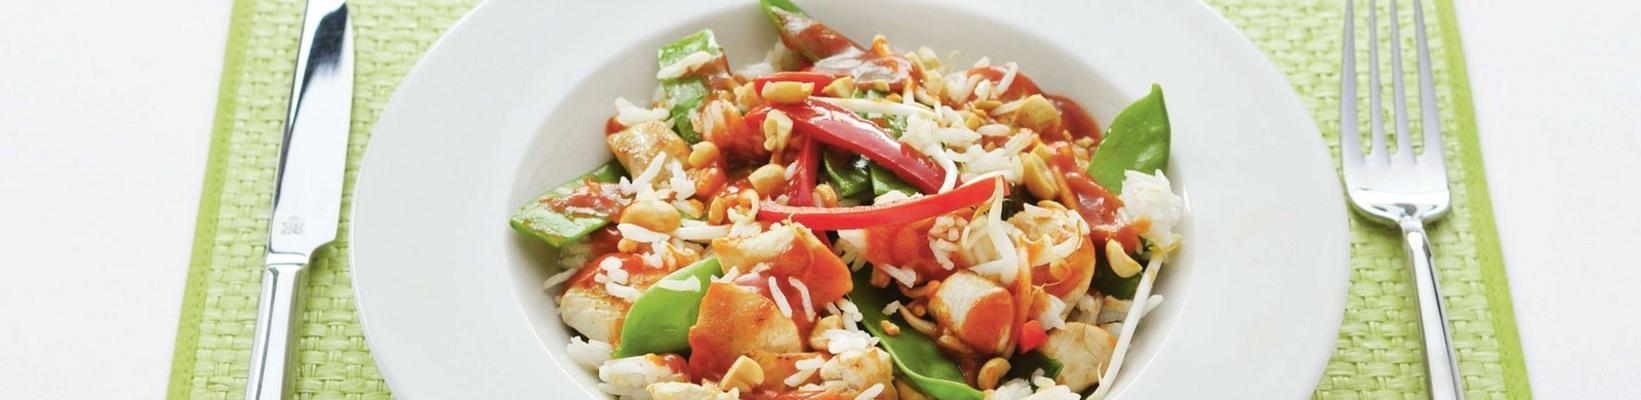 chicken fillet with sweet-sour tomato sauce, snow peas and peanuts